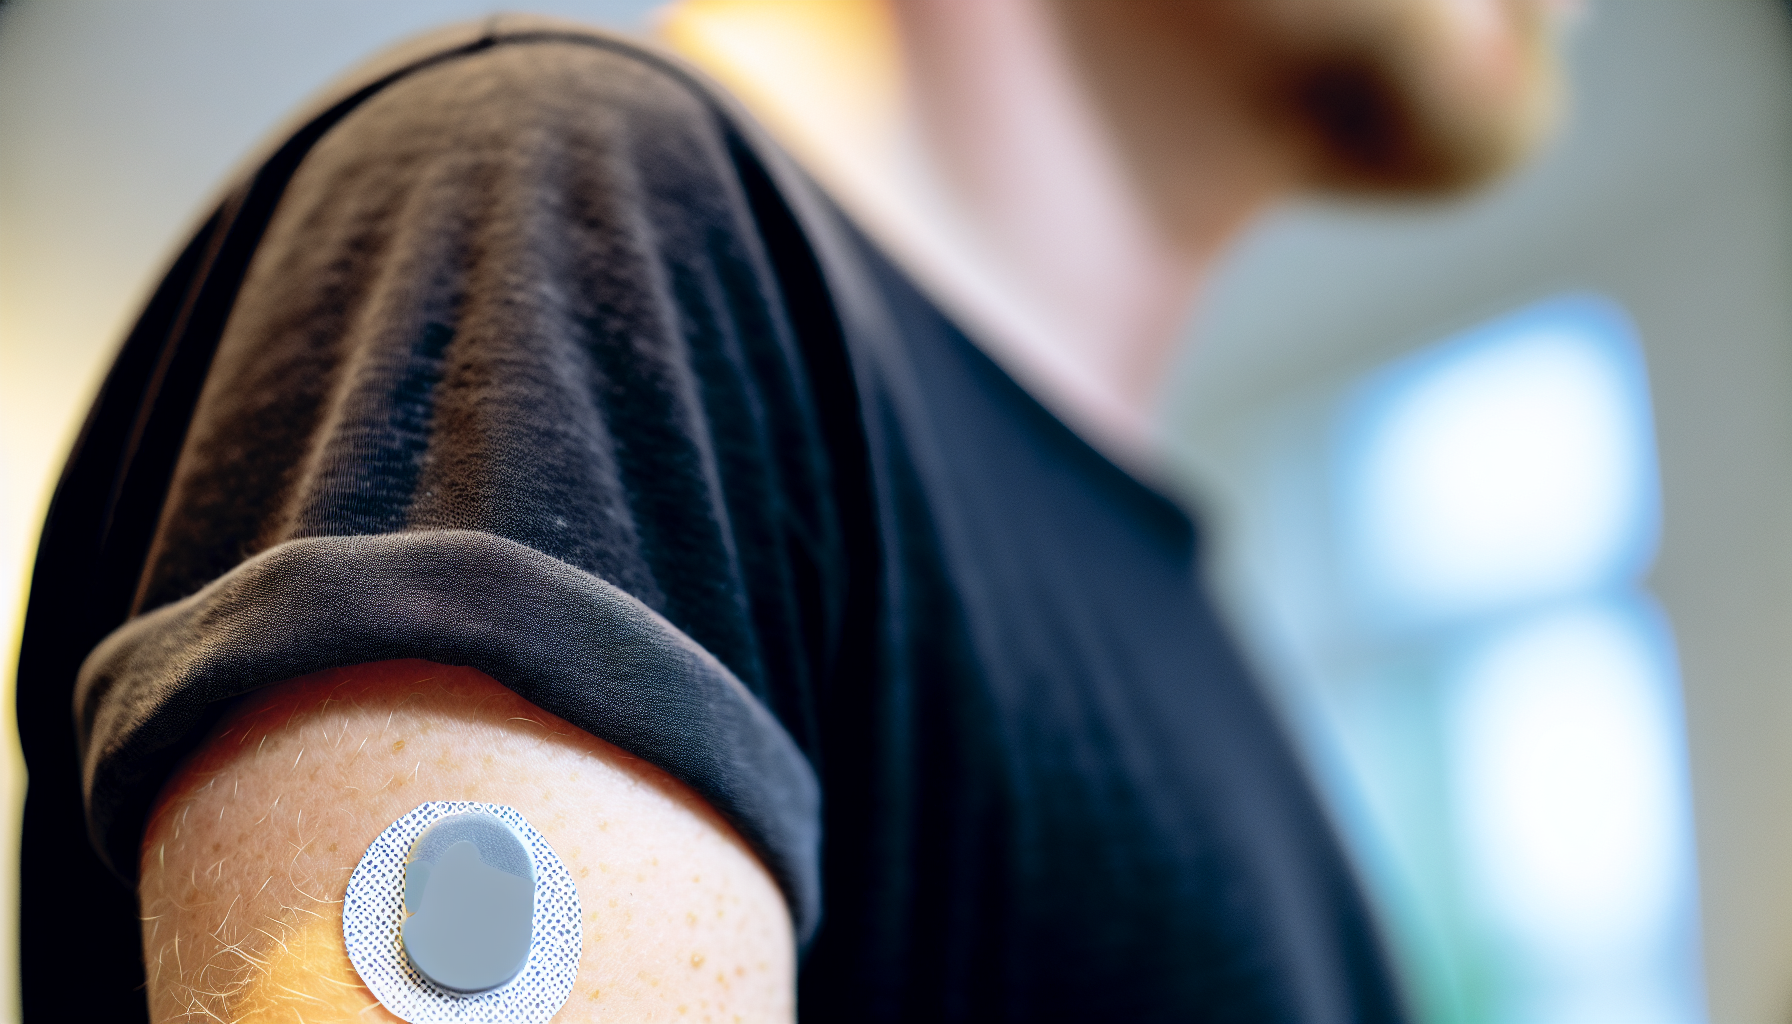 Skin irritation and sensor placement with a CGM device